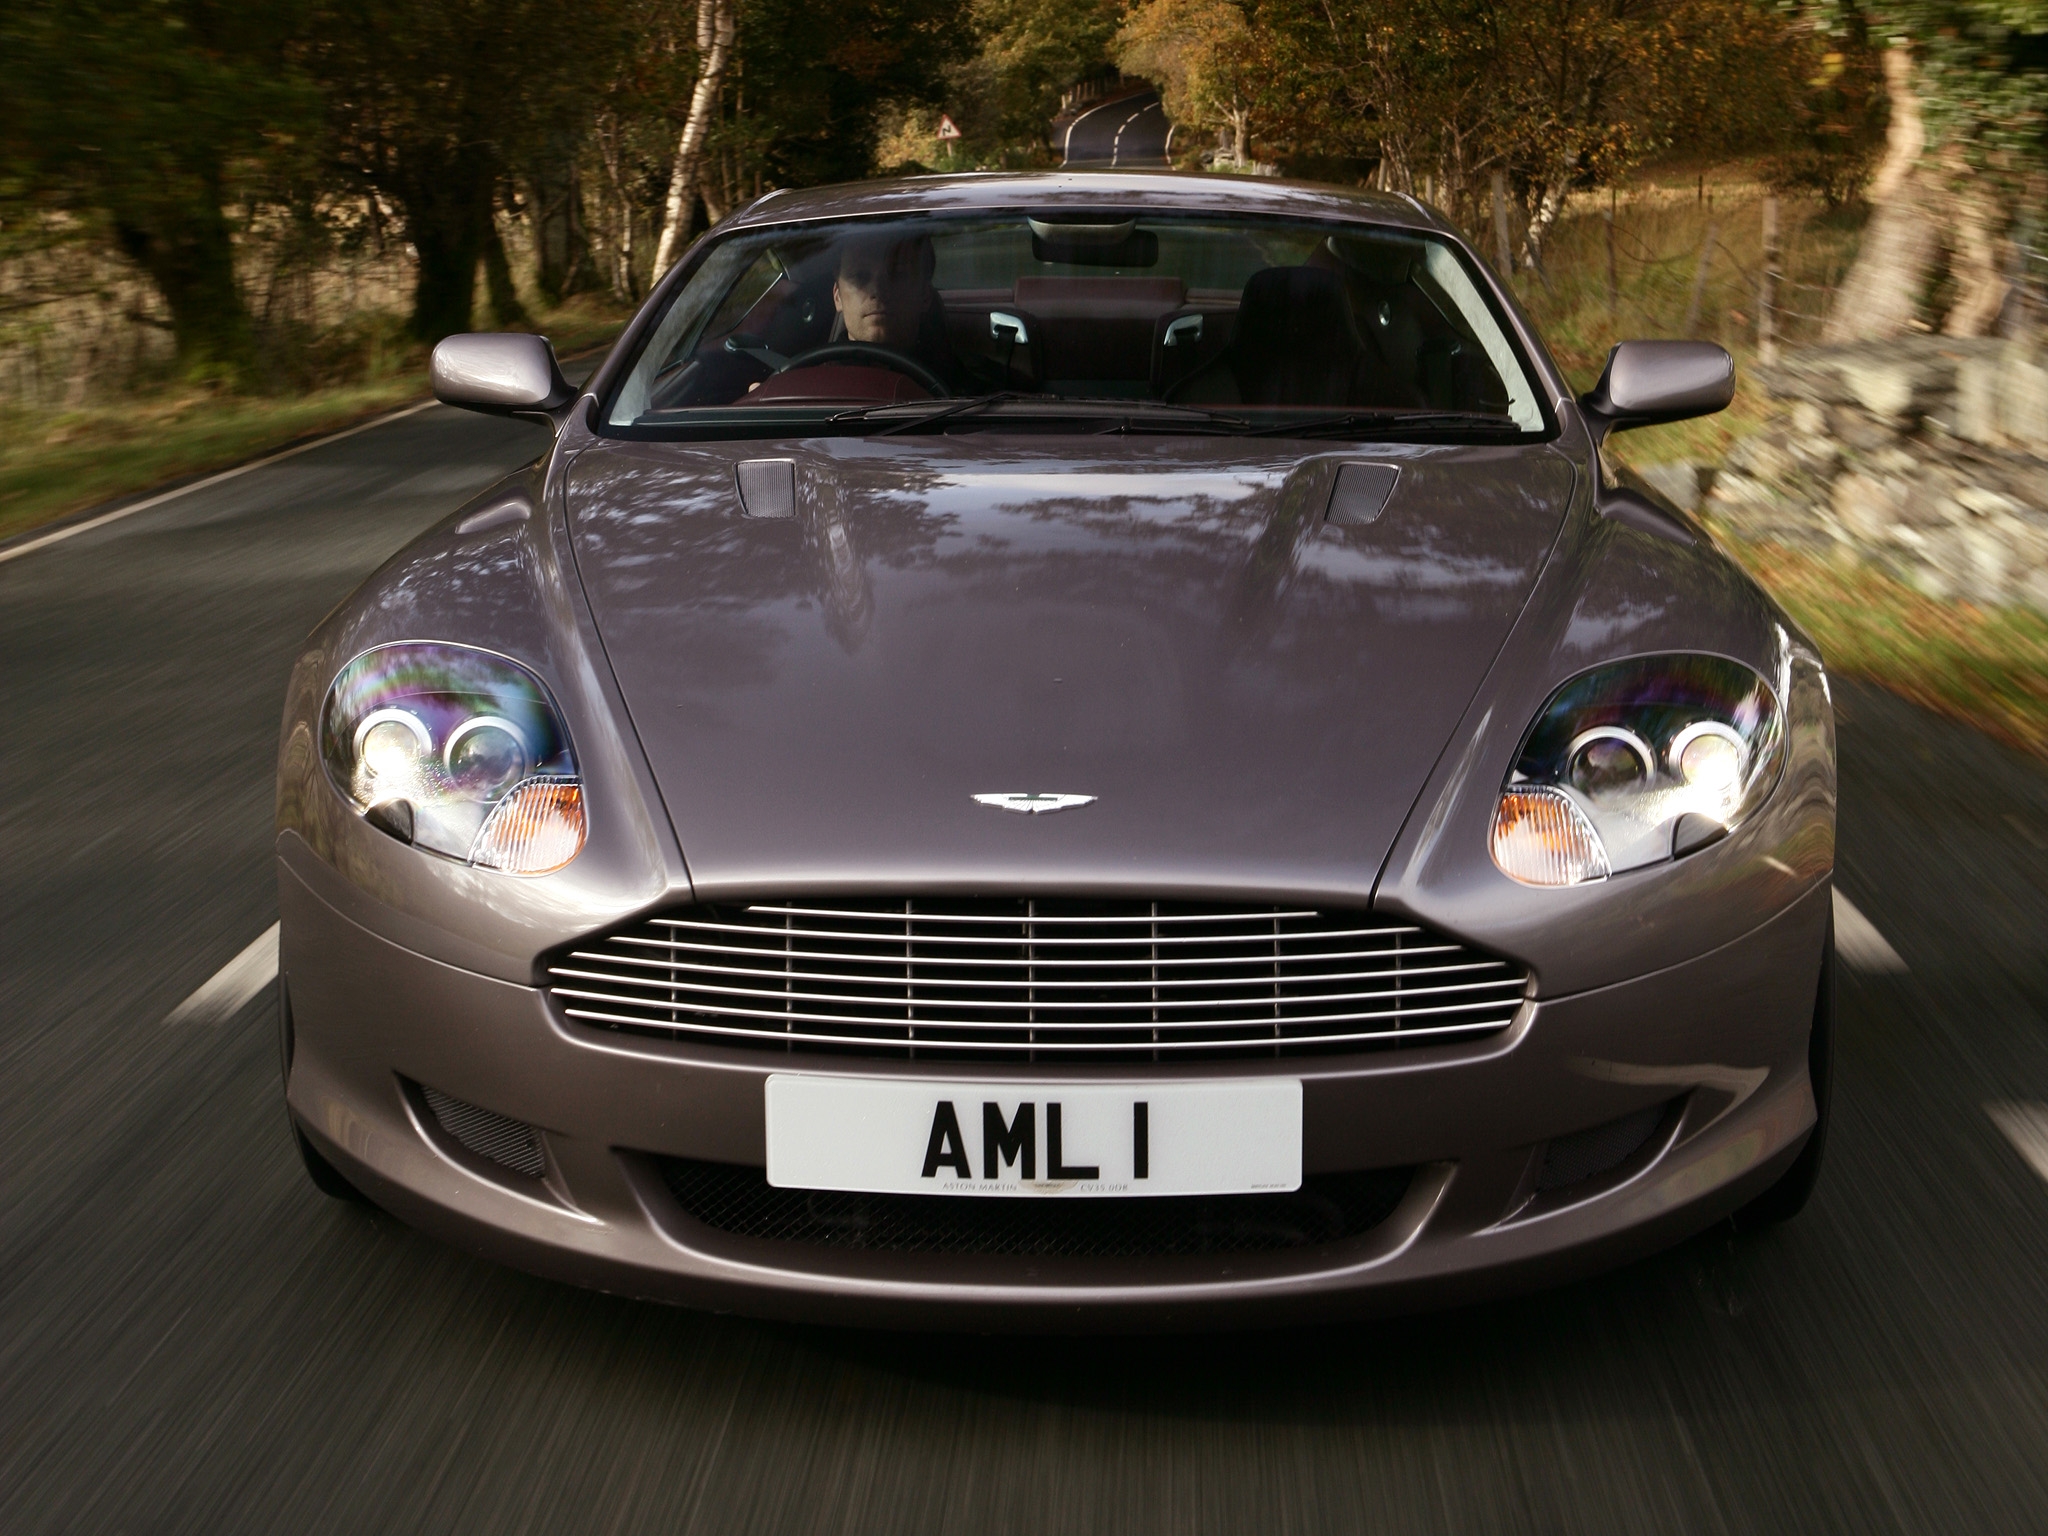 speed, sports, auto, trees, aston martin, cars, front view, grey, style, 2004, db9 2160p